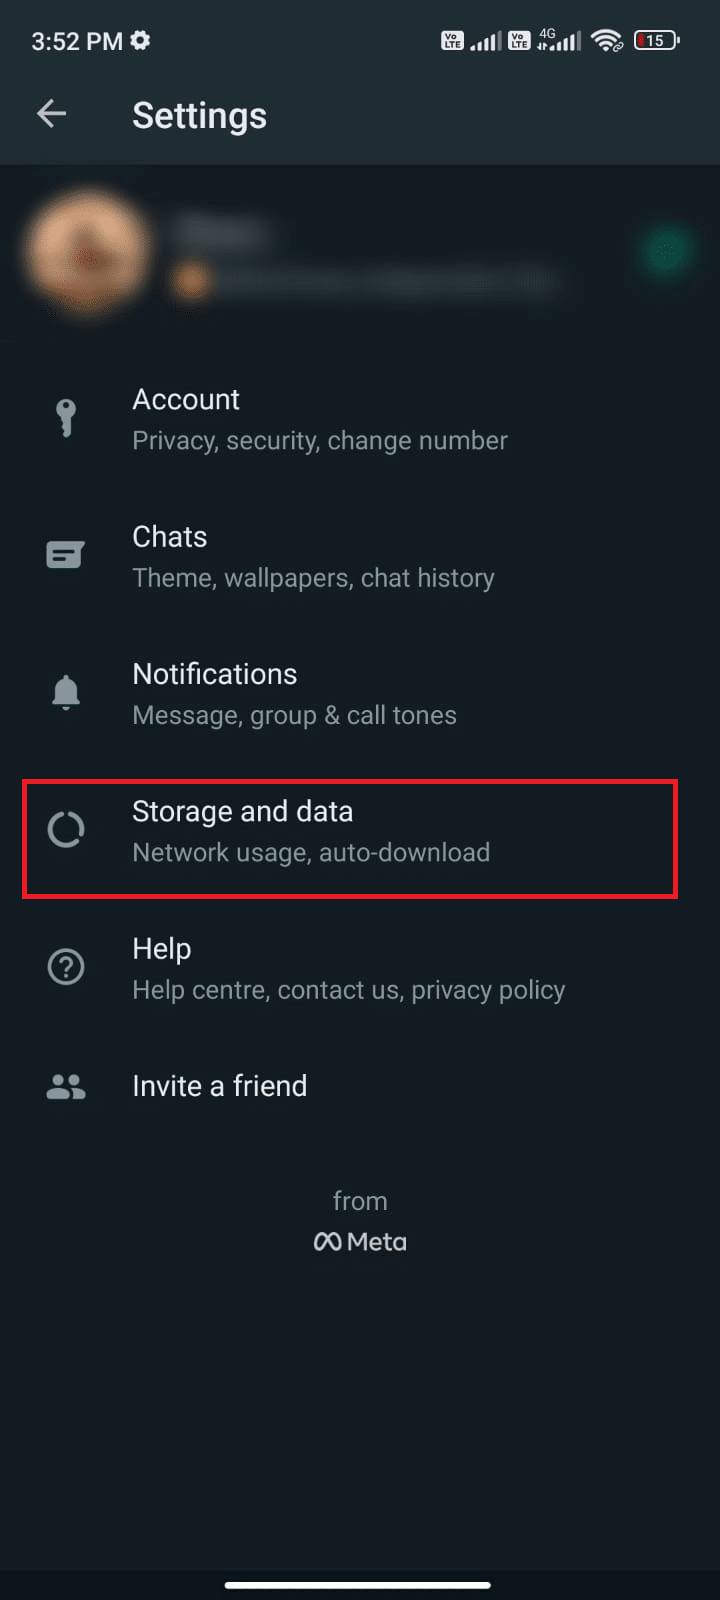 tap Storage and data